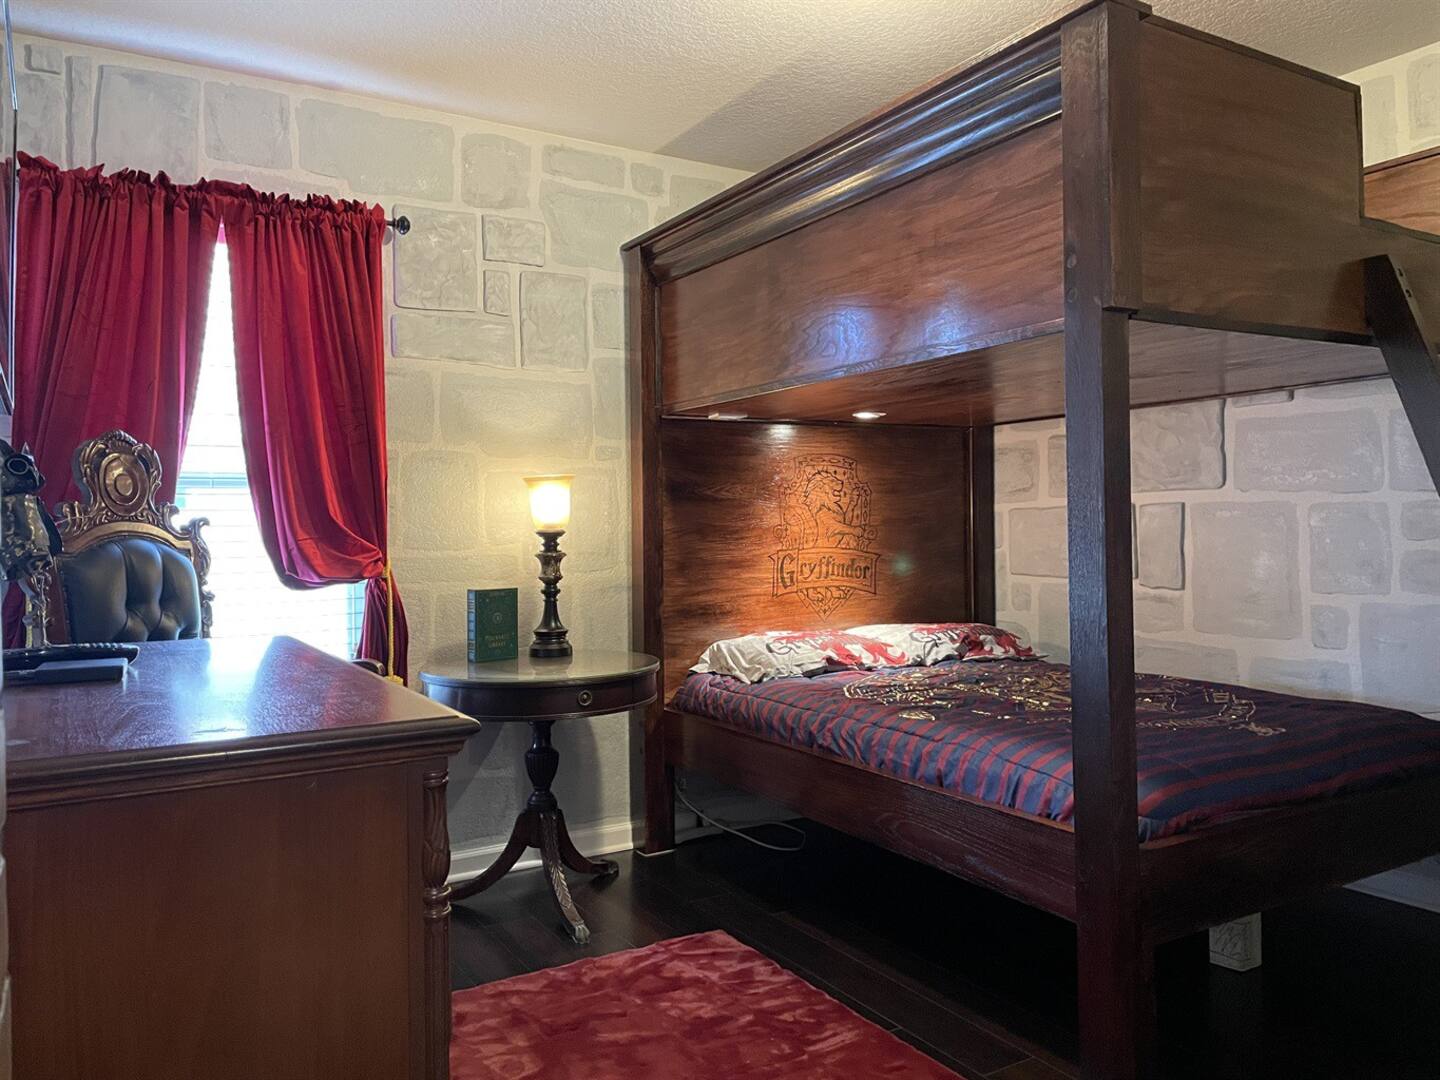 The Gryffindor dorm has a unique canopy bunk bed with two full-sized beds.